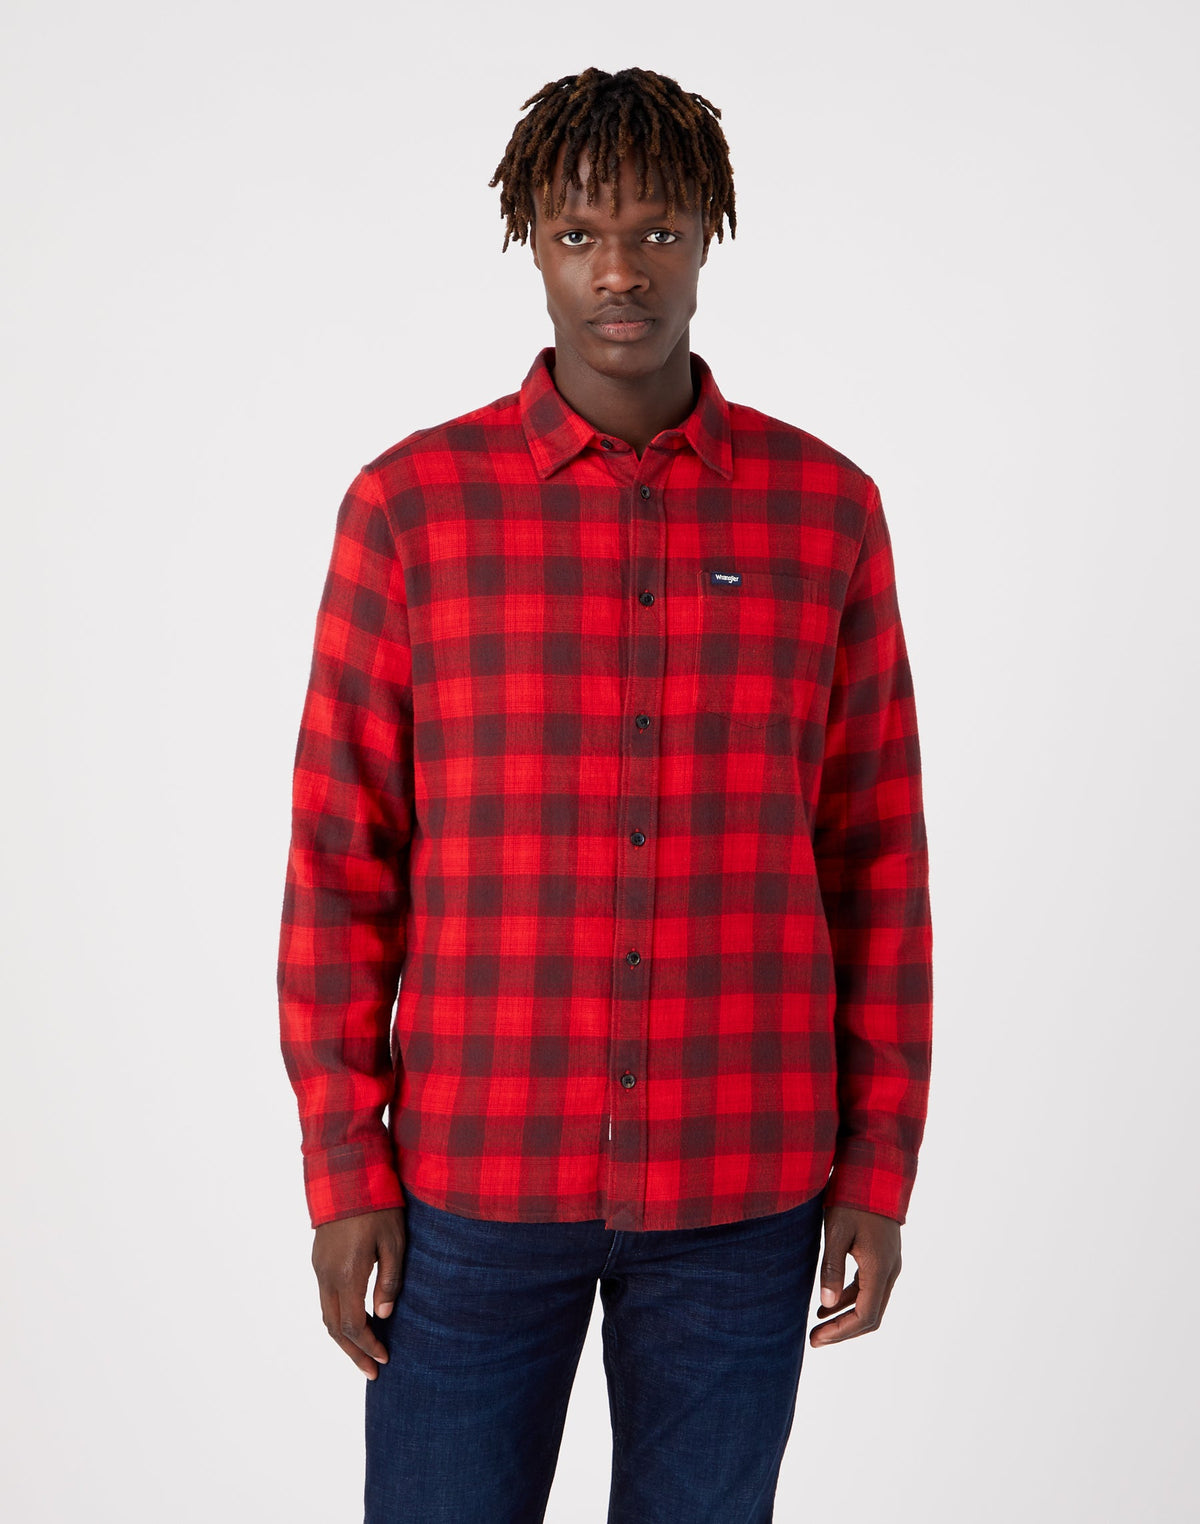 One Pocket Shirt in Rhubarb Red